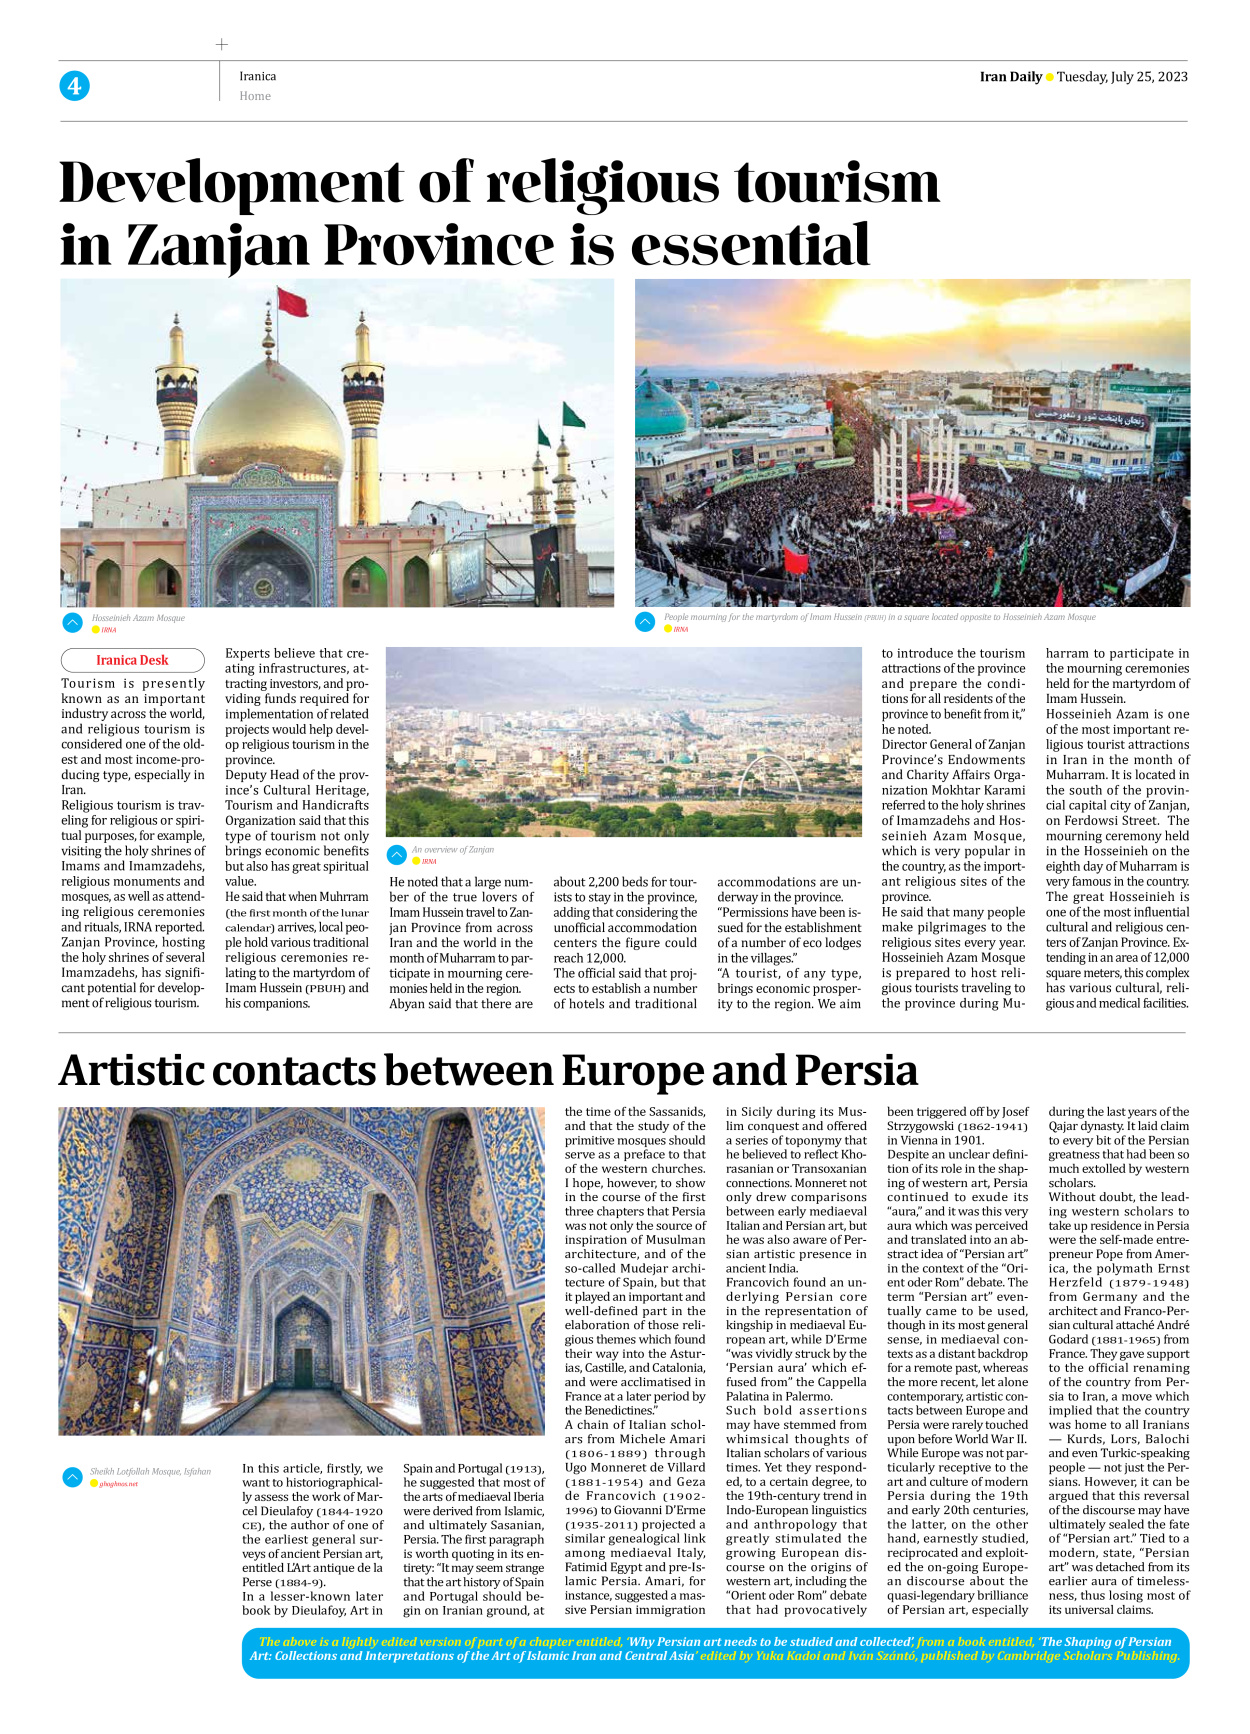 Iran Daily - Number Seven Thousand Three Hundred and Forty Eight - 25 July 2023 - Page 4